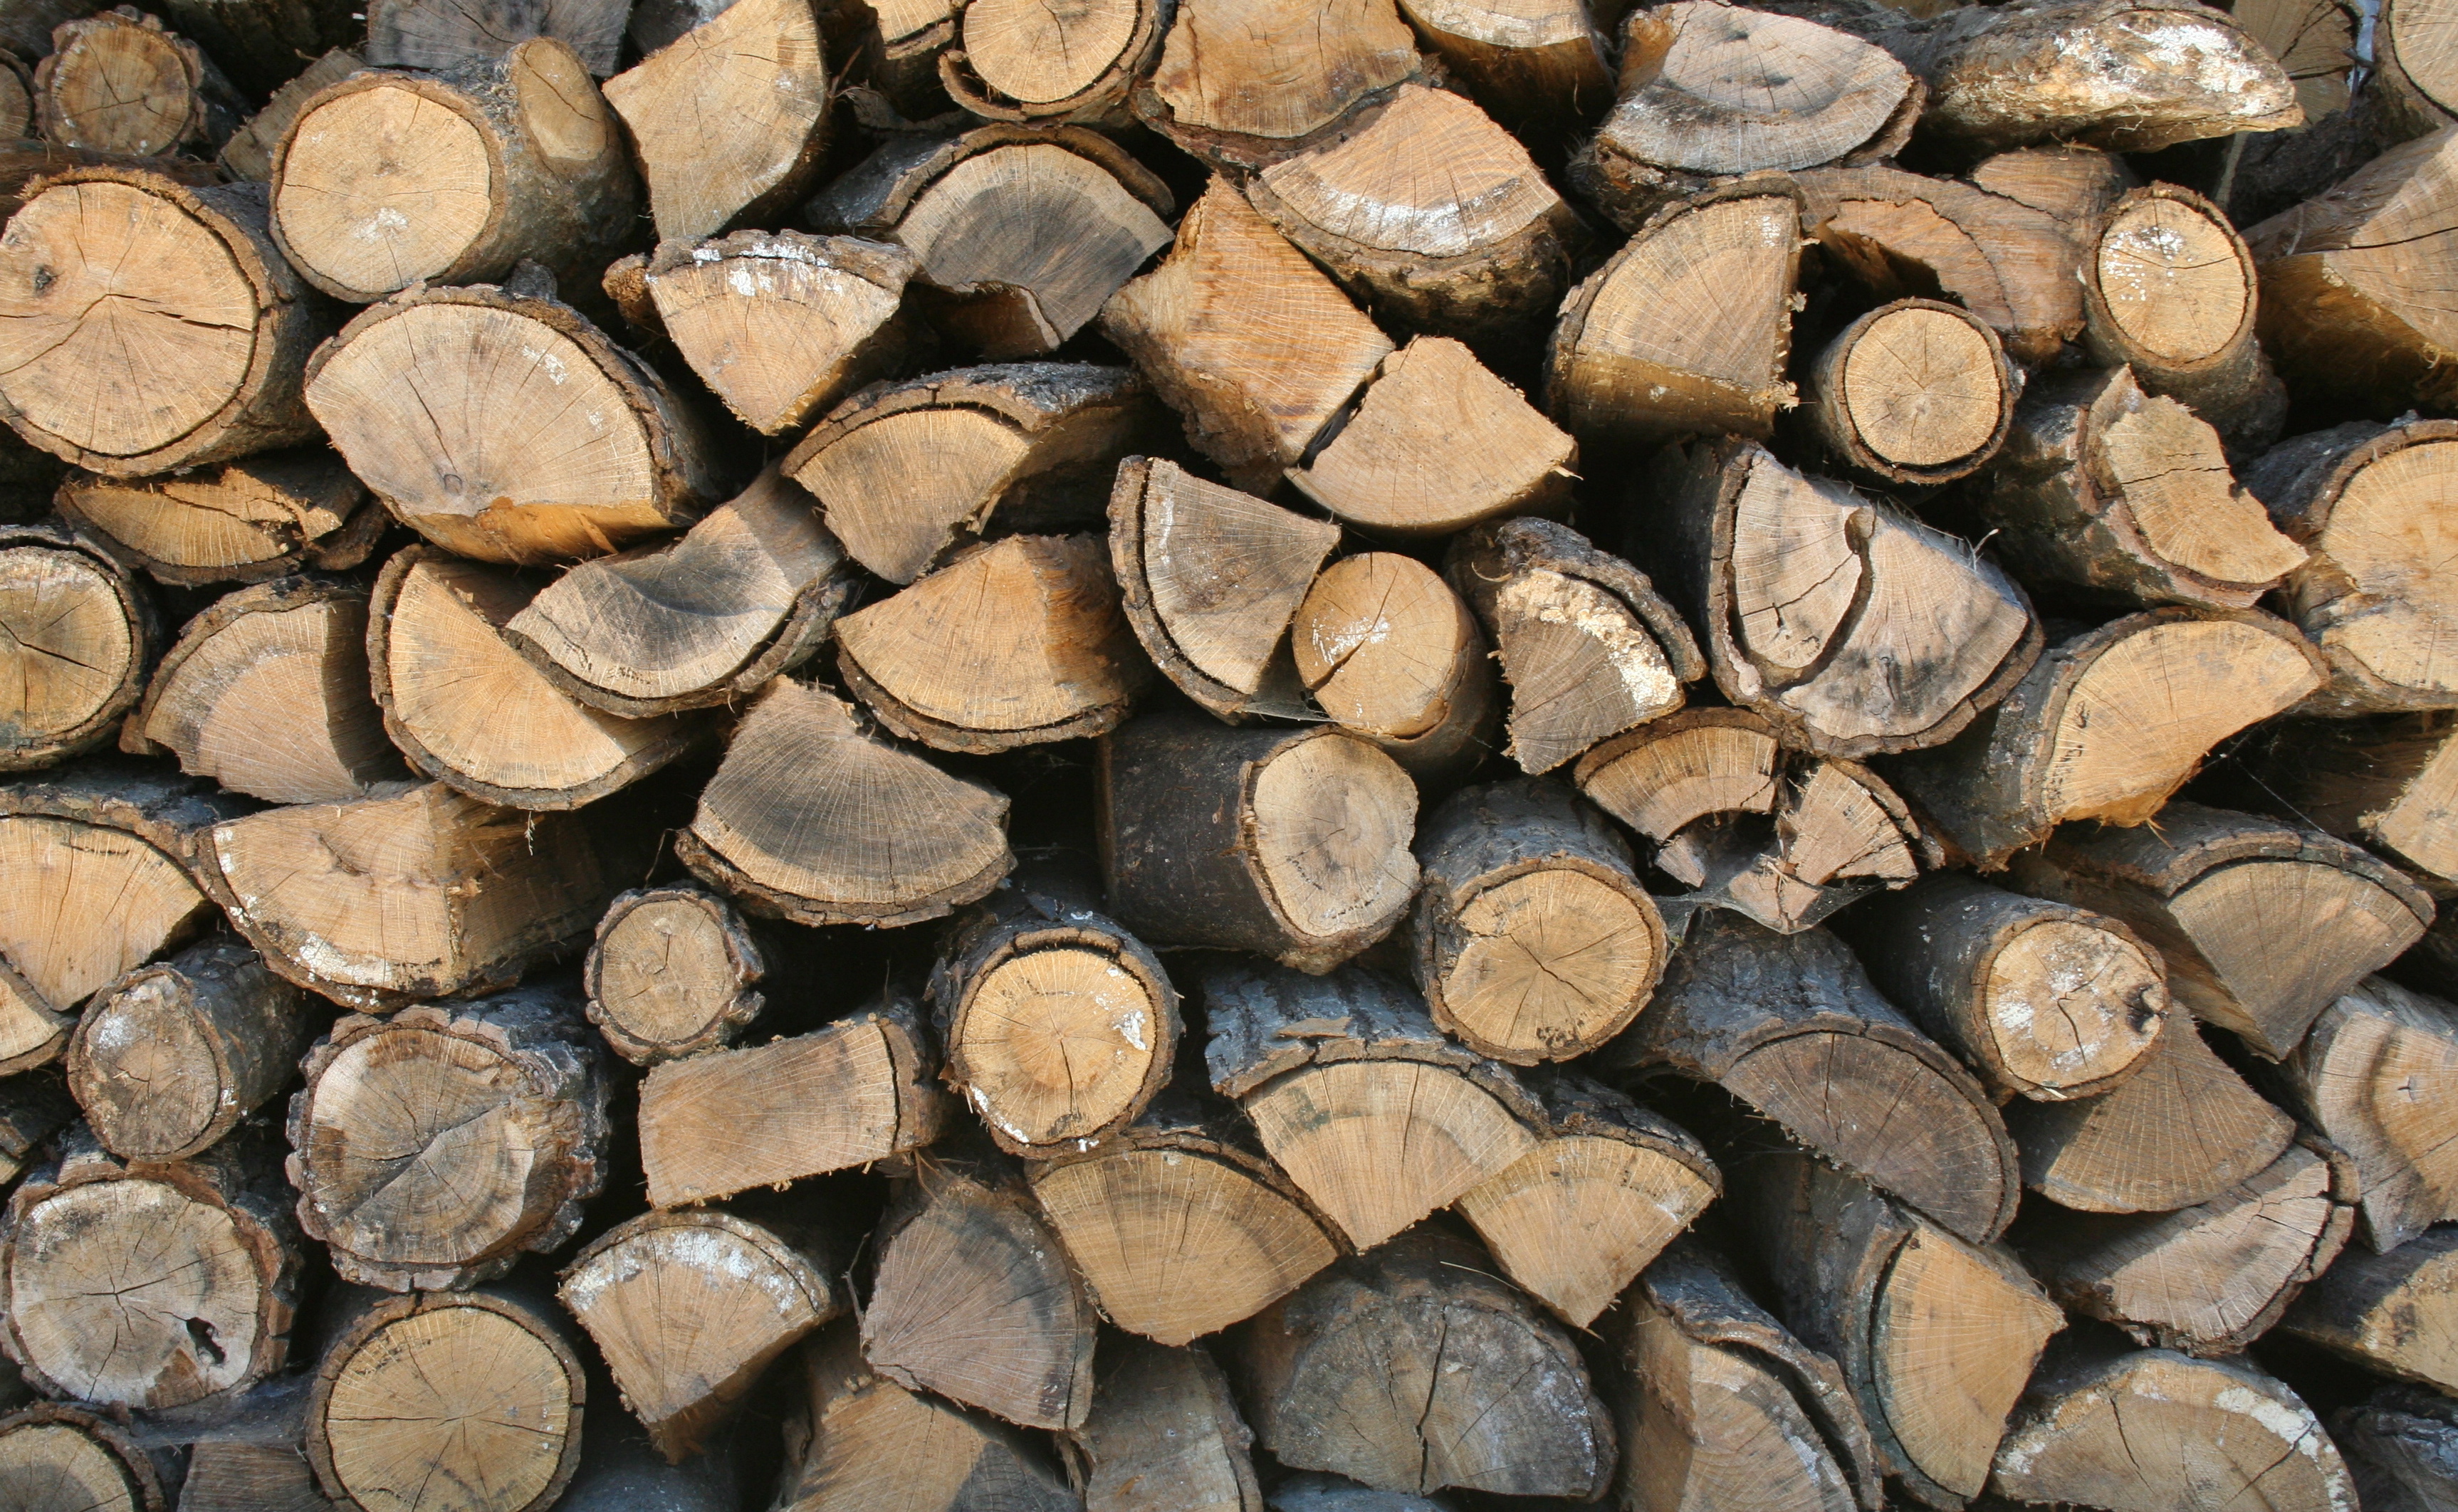 Calculating Your Wood for the Winter